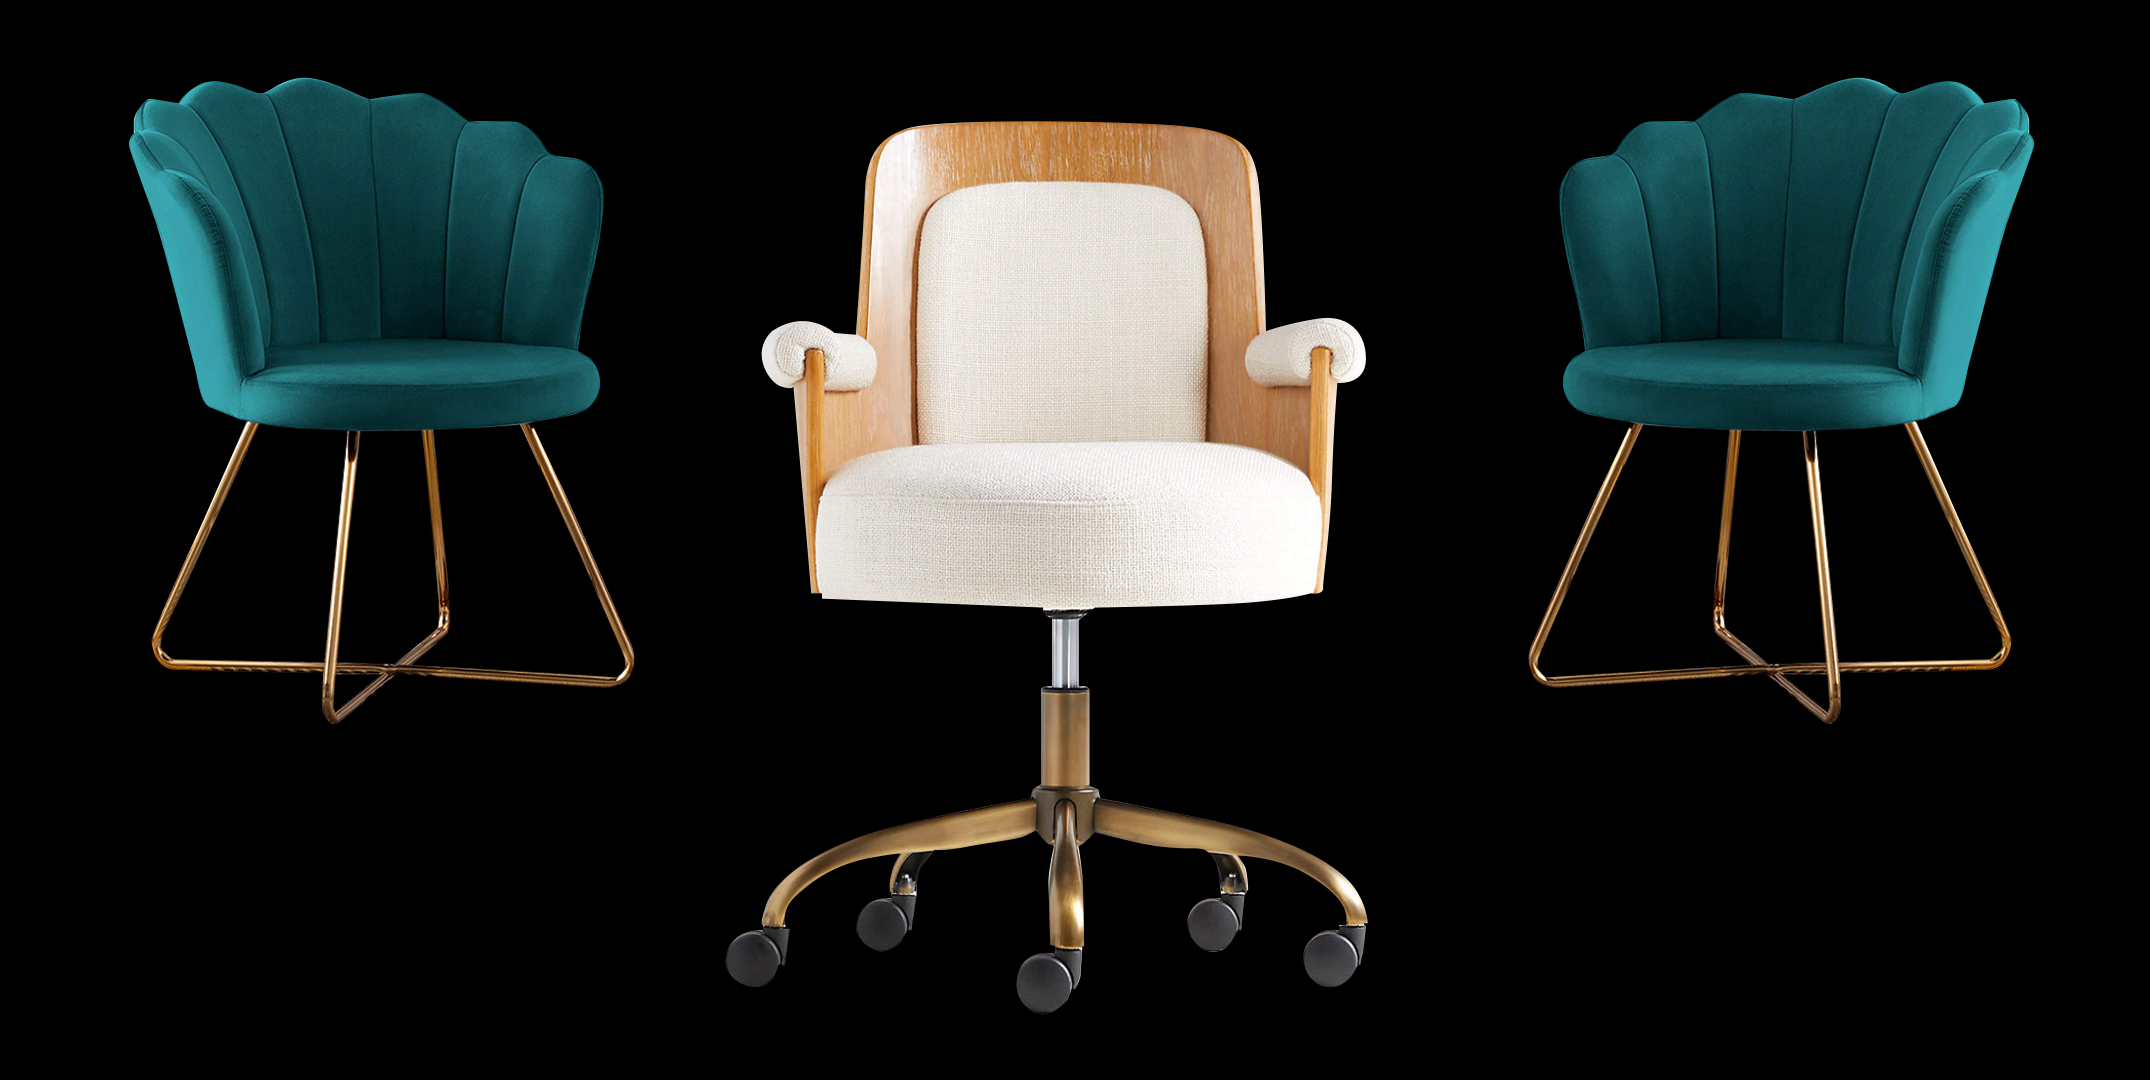 The 7 Best Office Chairs of 2022 - Comfortable Chairs for Your